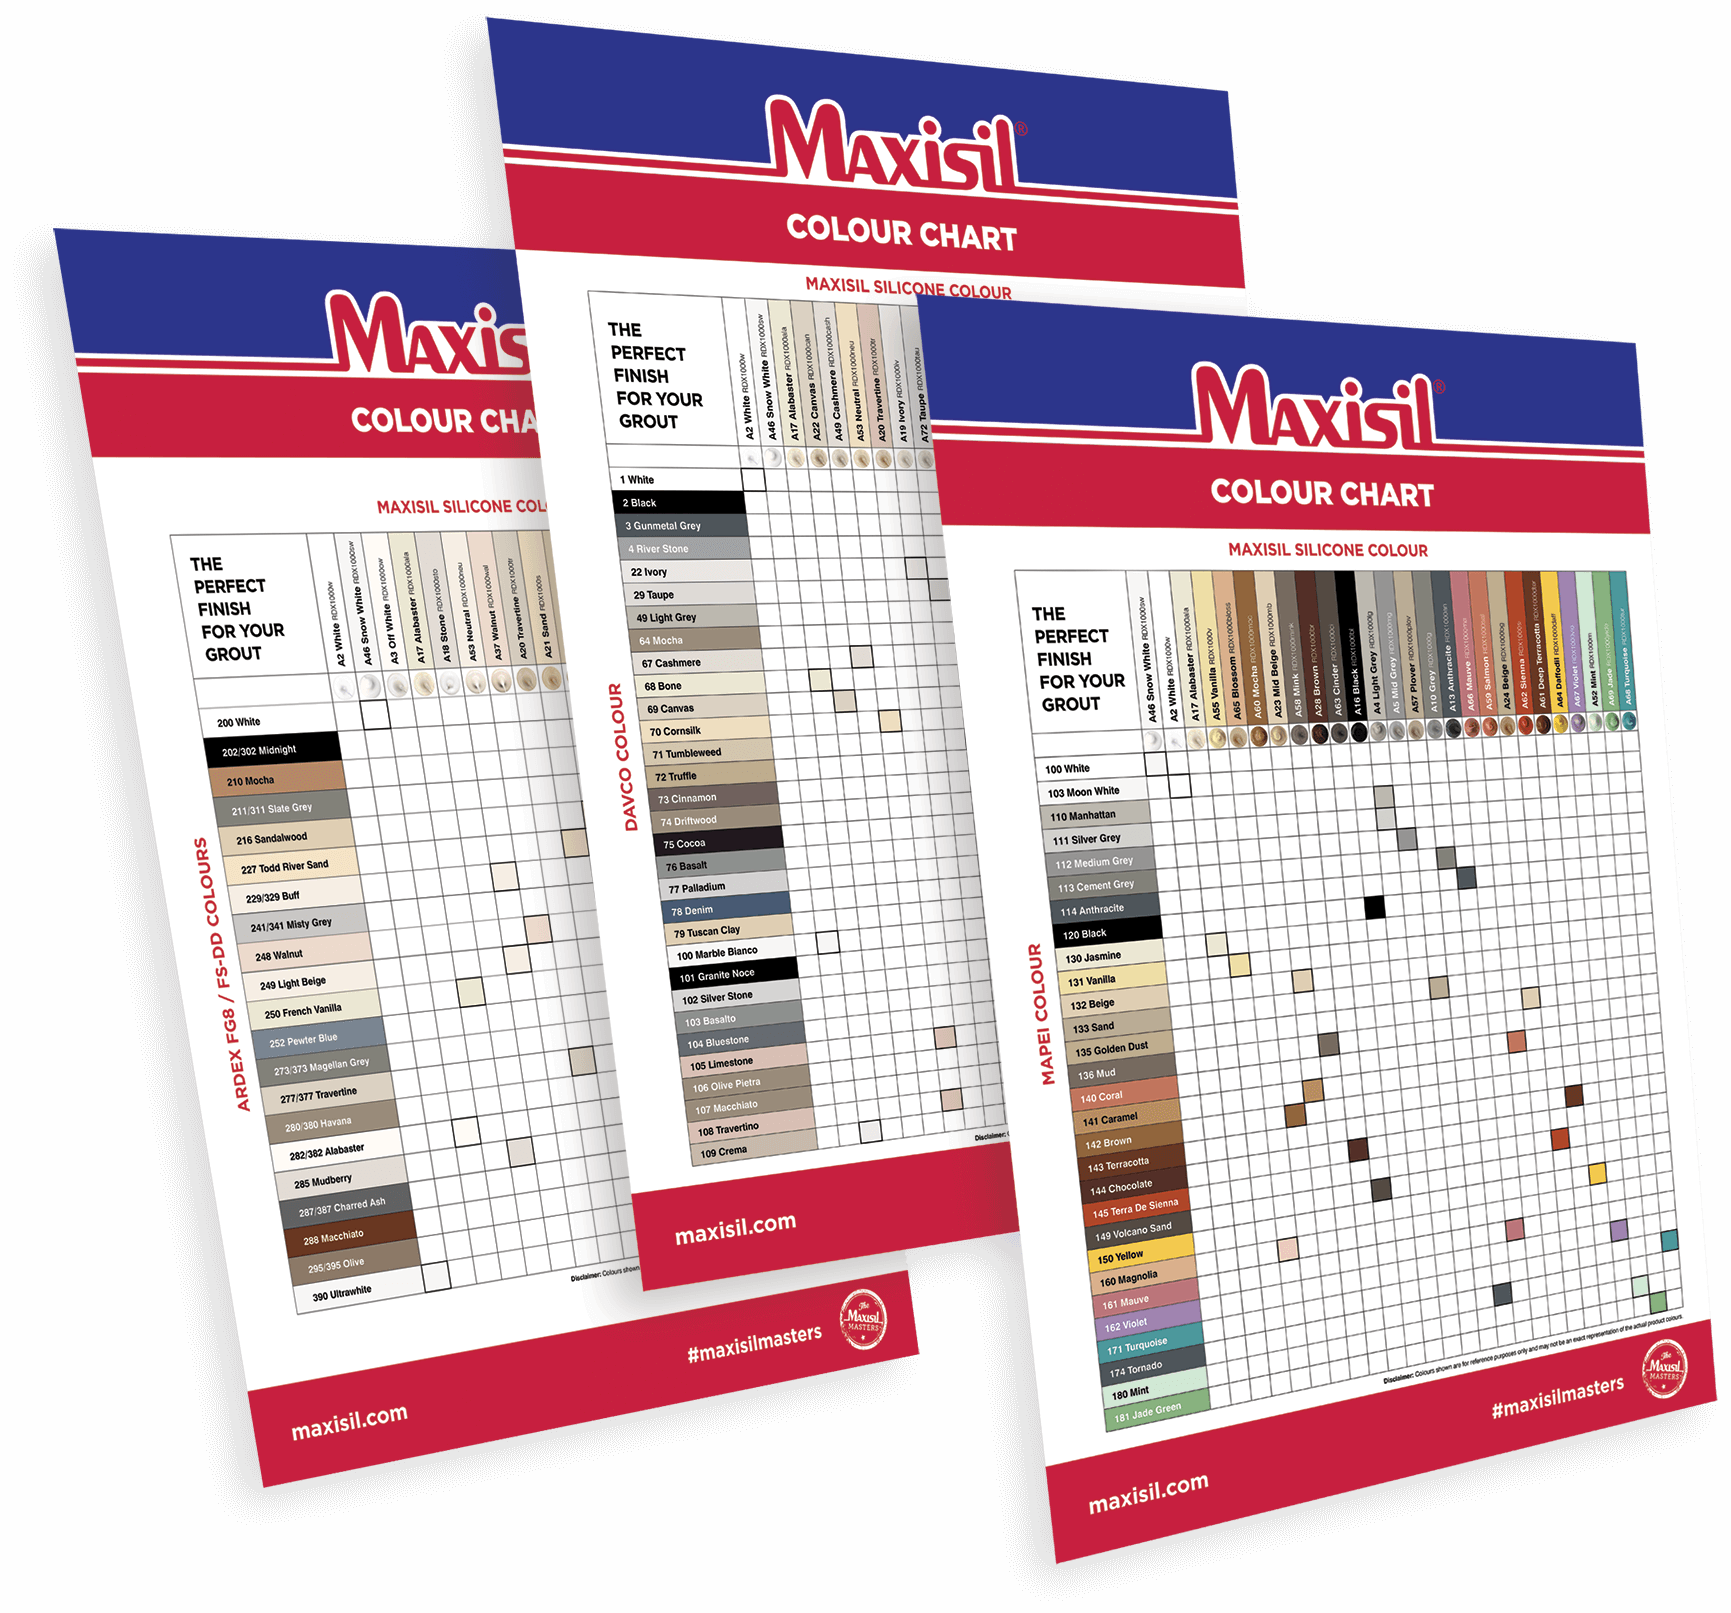 Mapei Grout Conversion Chart